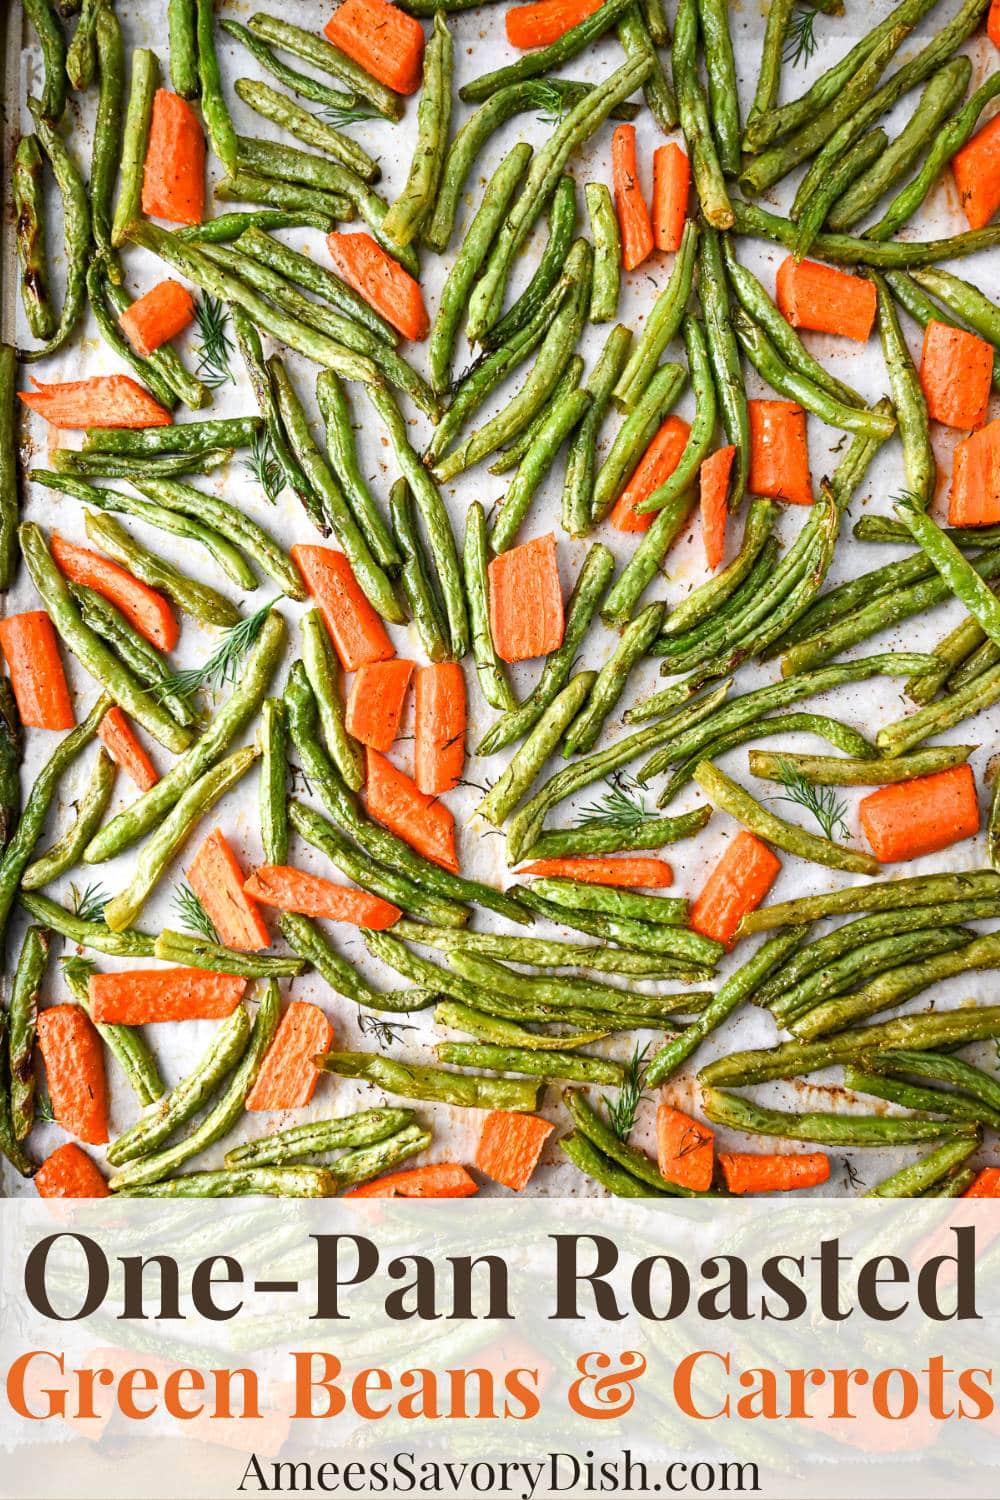 This Roasted Green Beans and Carrots recipe is a hassle-free, 30-minute side dish featuring the perfect blend of crisp-tender vegetables, olive oil, and simple herbs and spices. via @Ameessavorydish